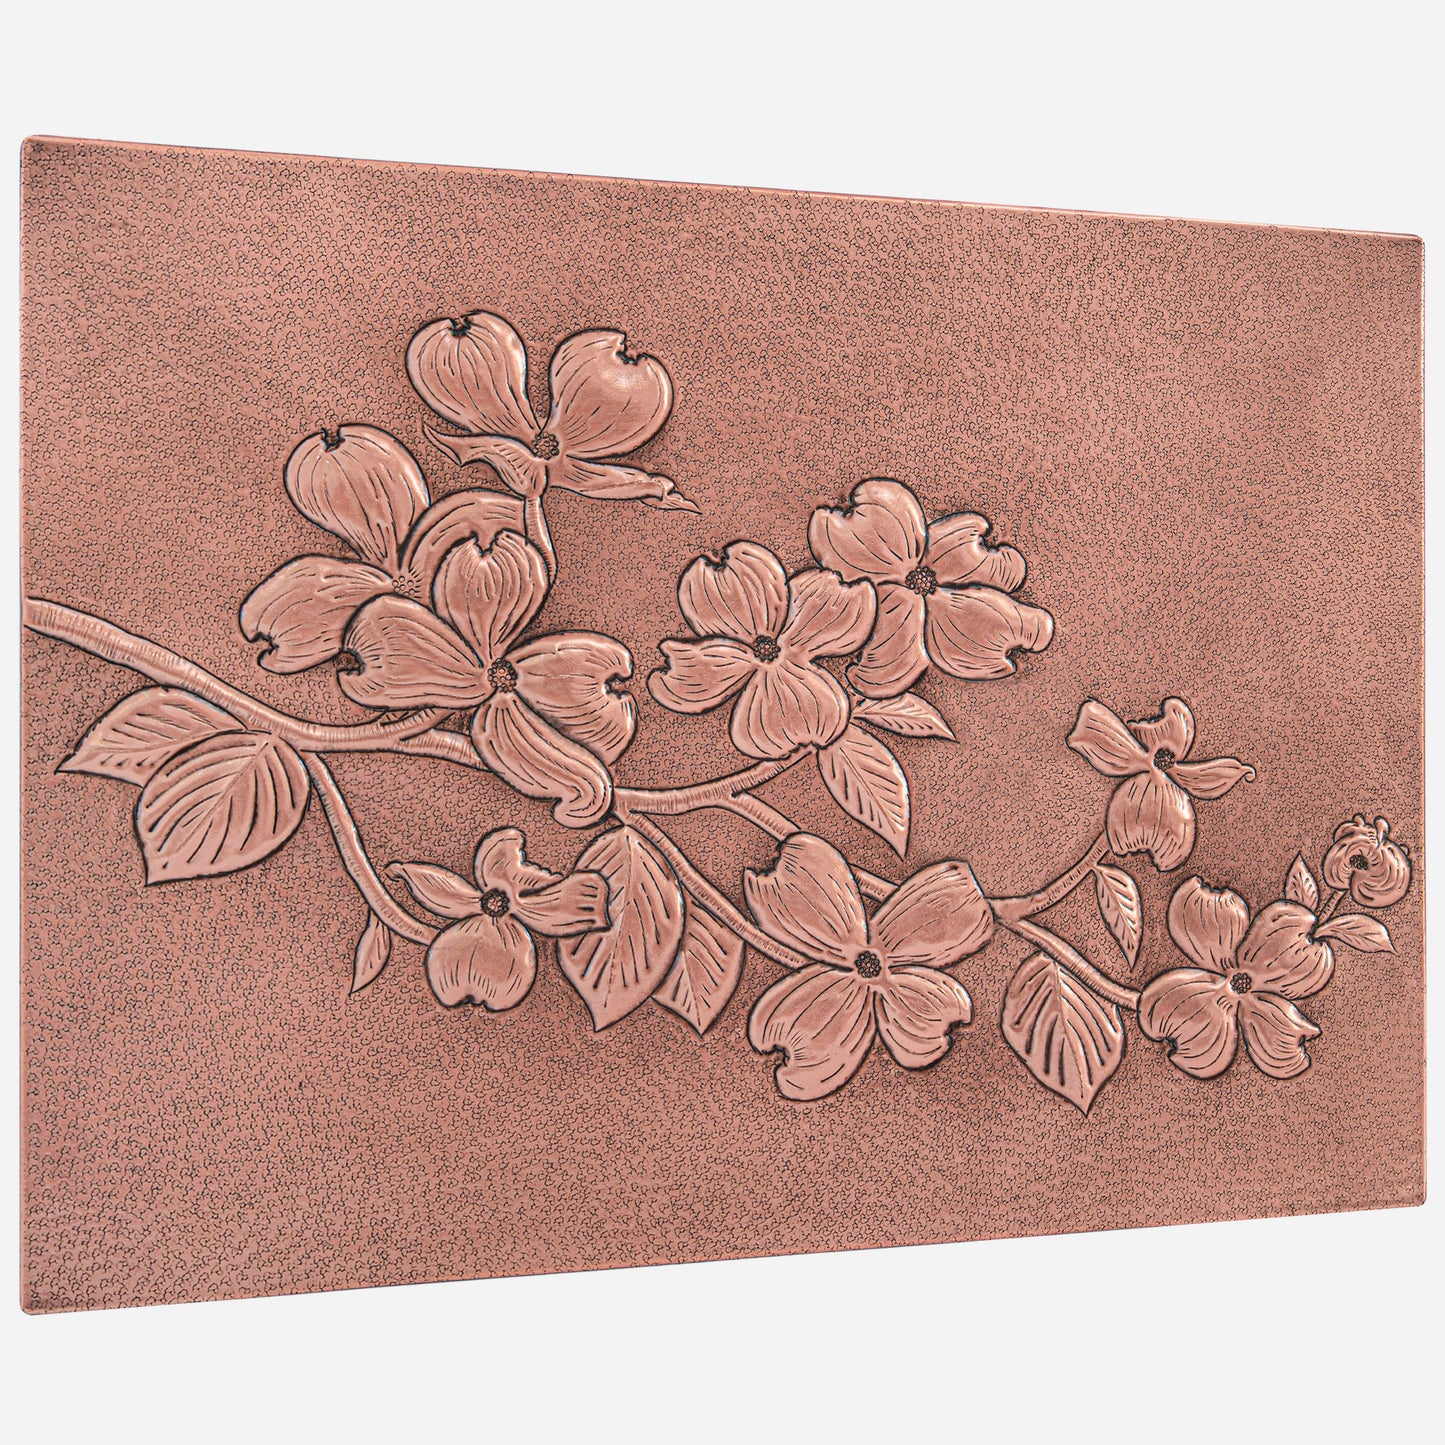 Copper Backsplash Panel (Branch of Dogwood with Flowers and Leaves)